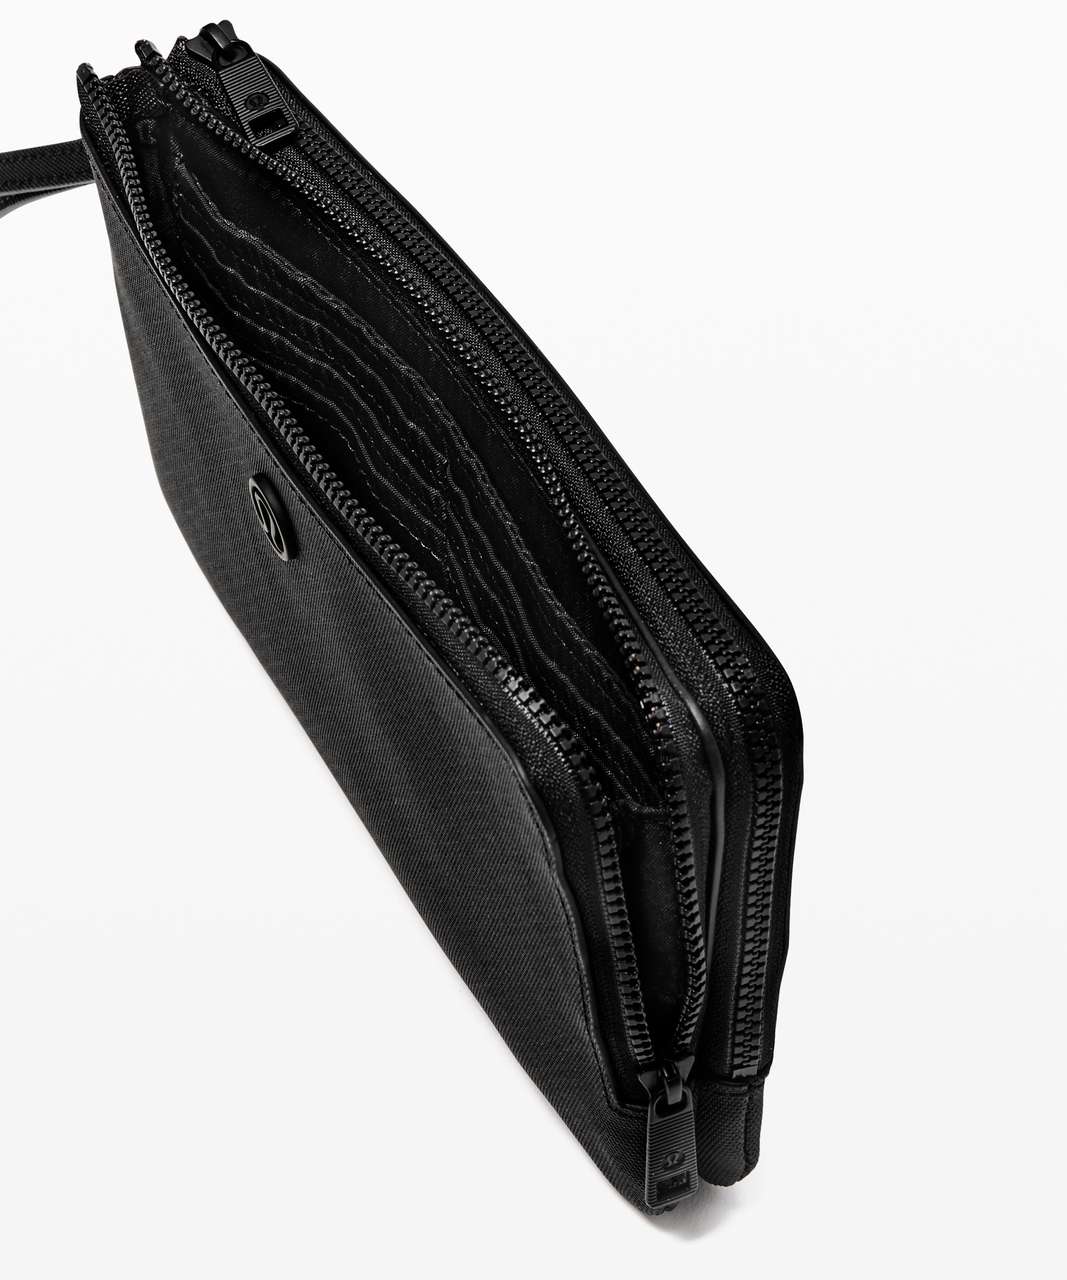 Lululemon Double Up Pouch - Black (Fourth Release)